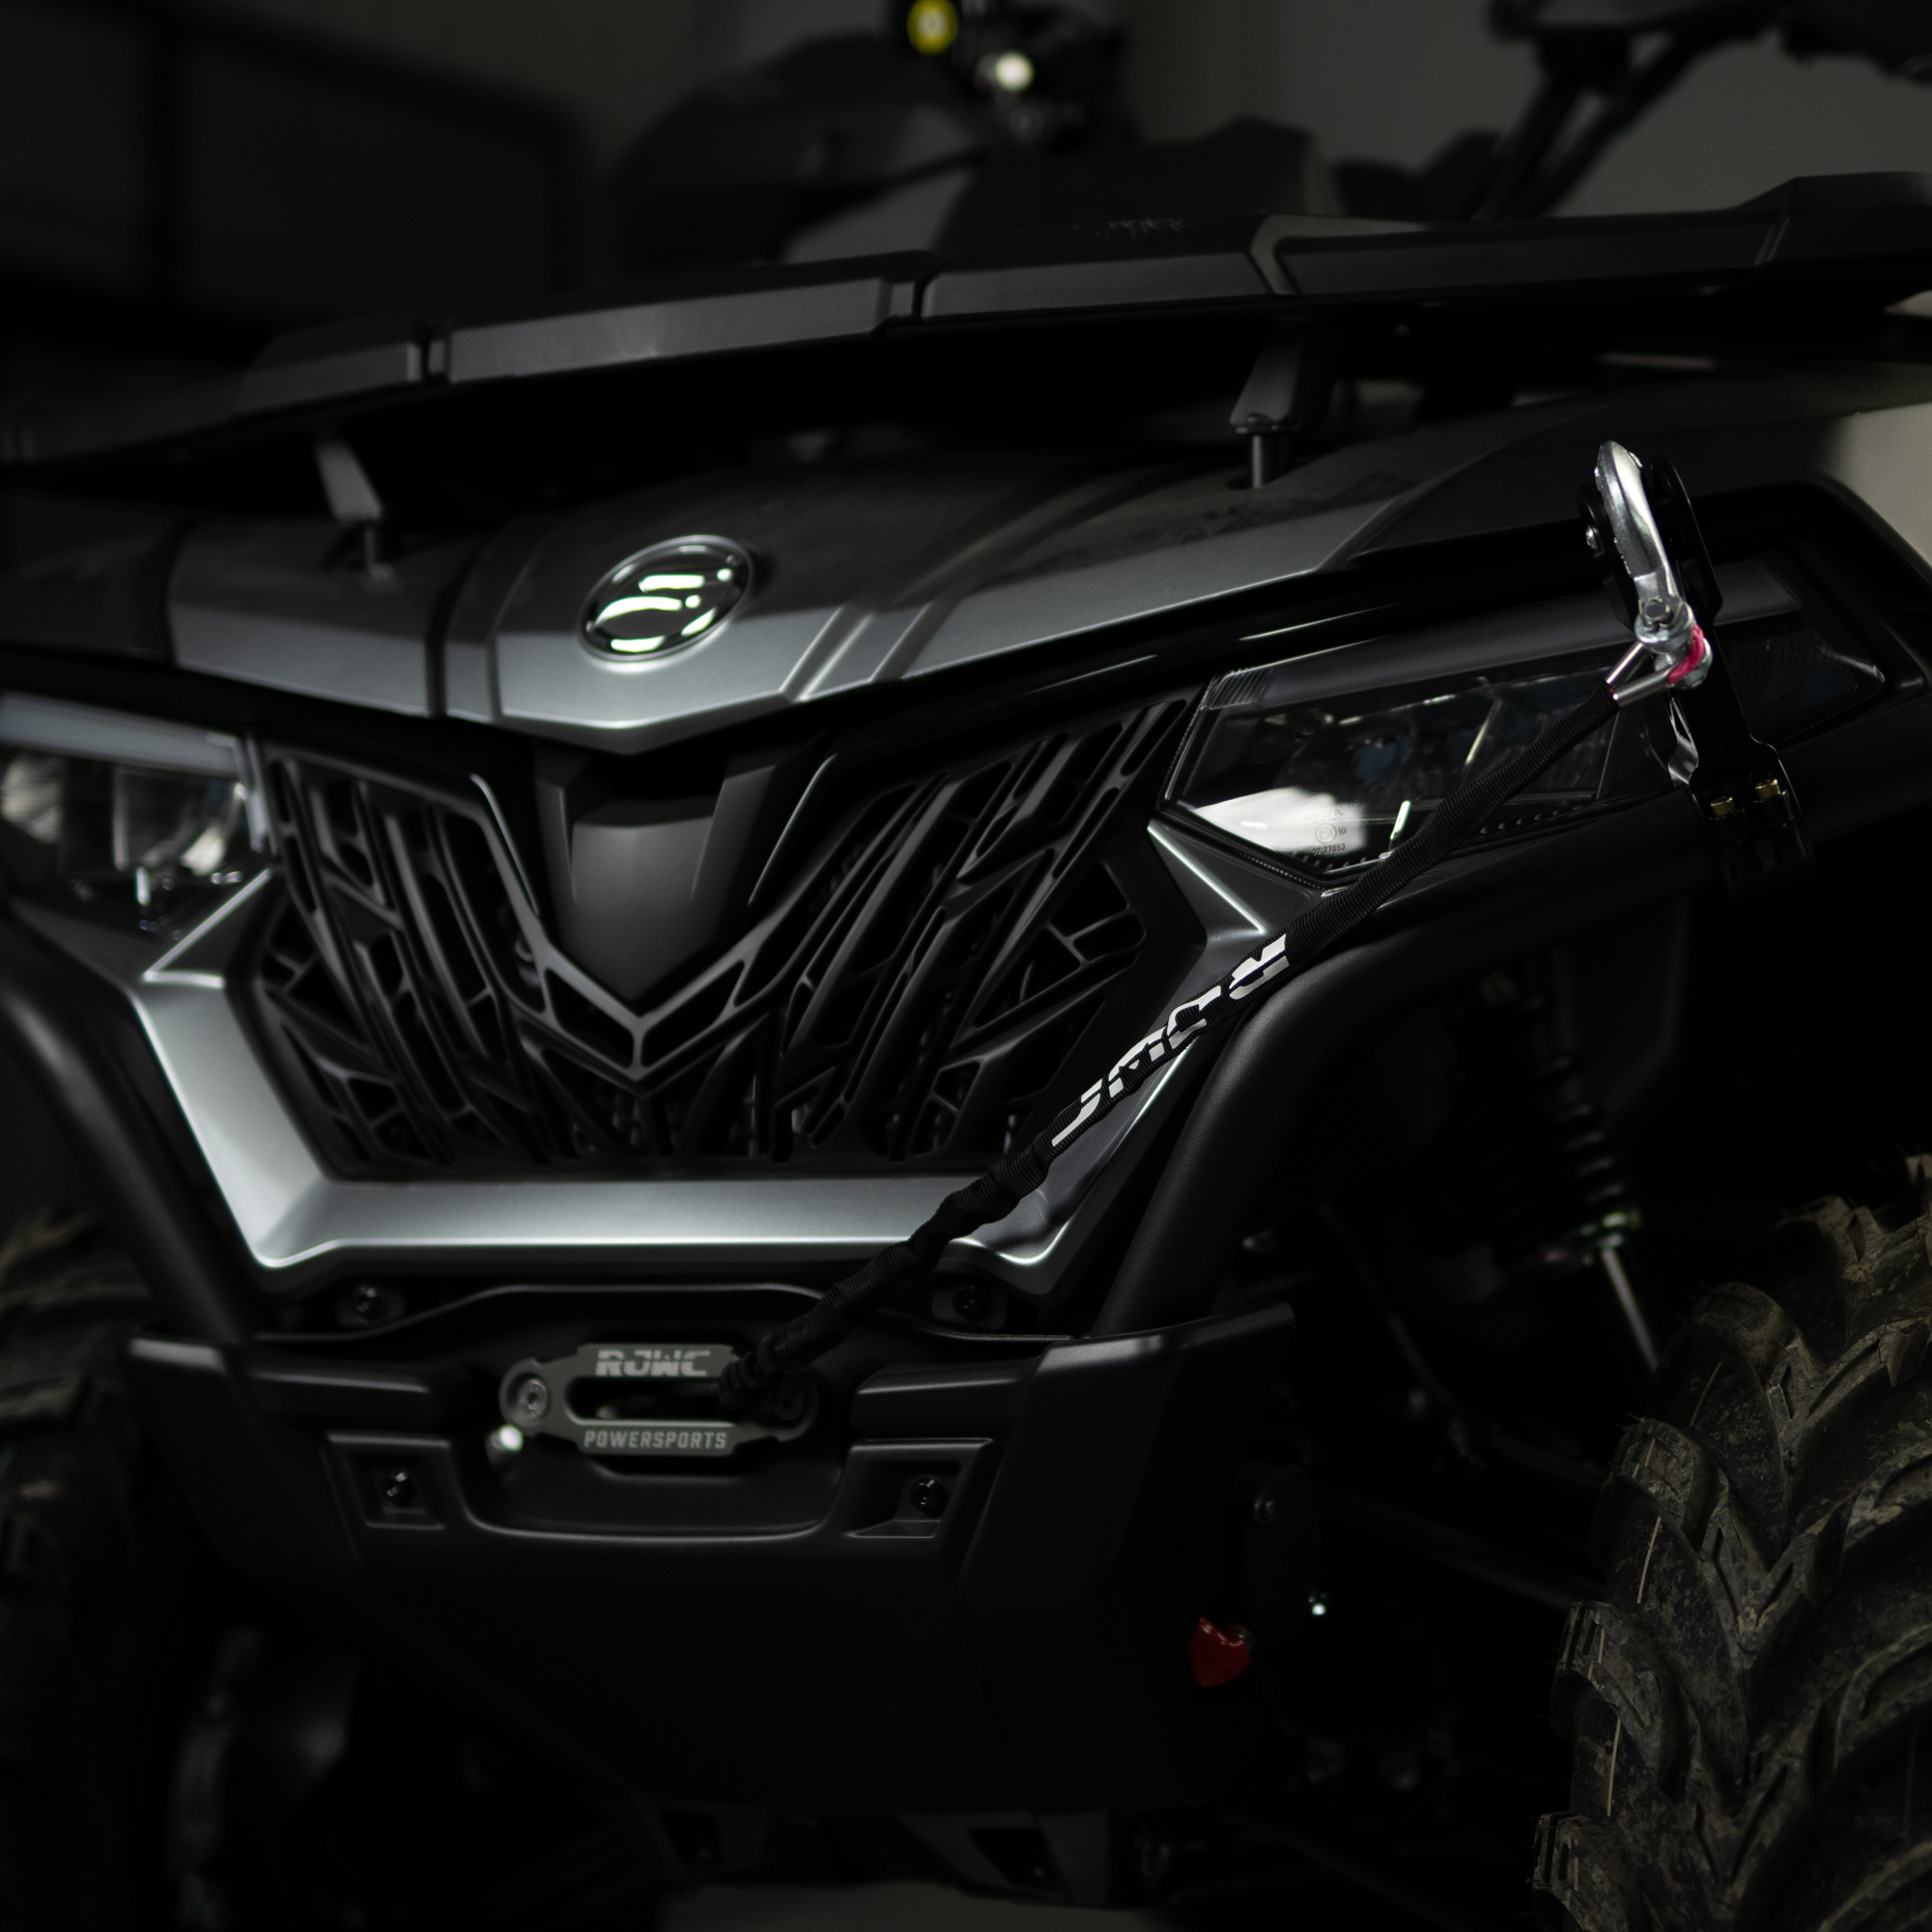 CFMOTO CForce 625, one of the many off-road vehicles that can benefit from RJWC Powersports' high-quality exhaust systems.